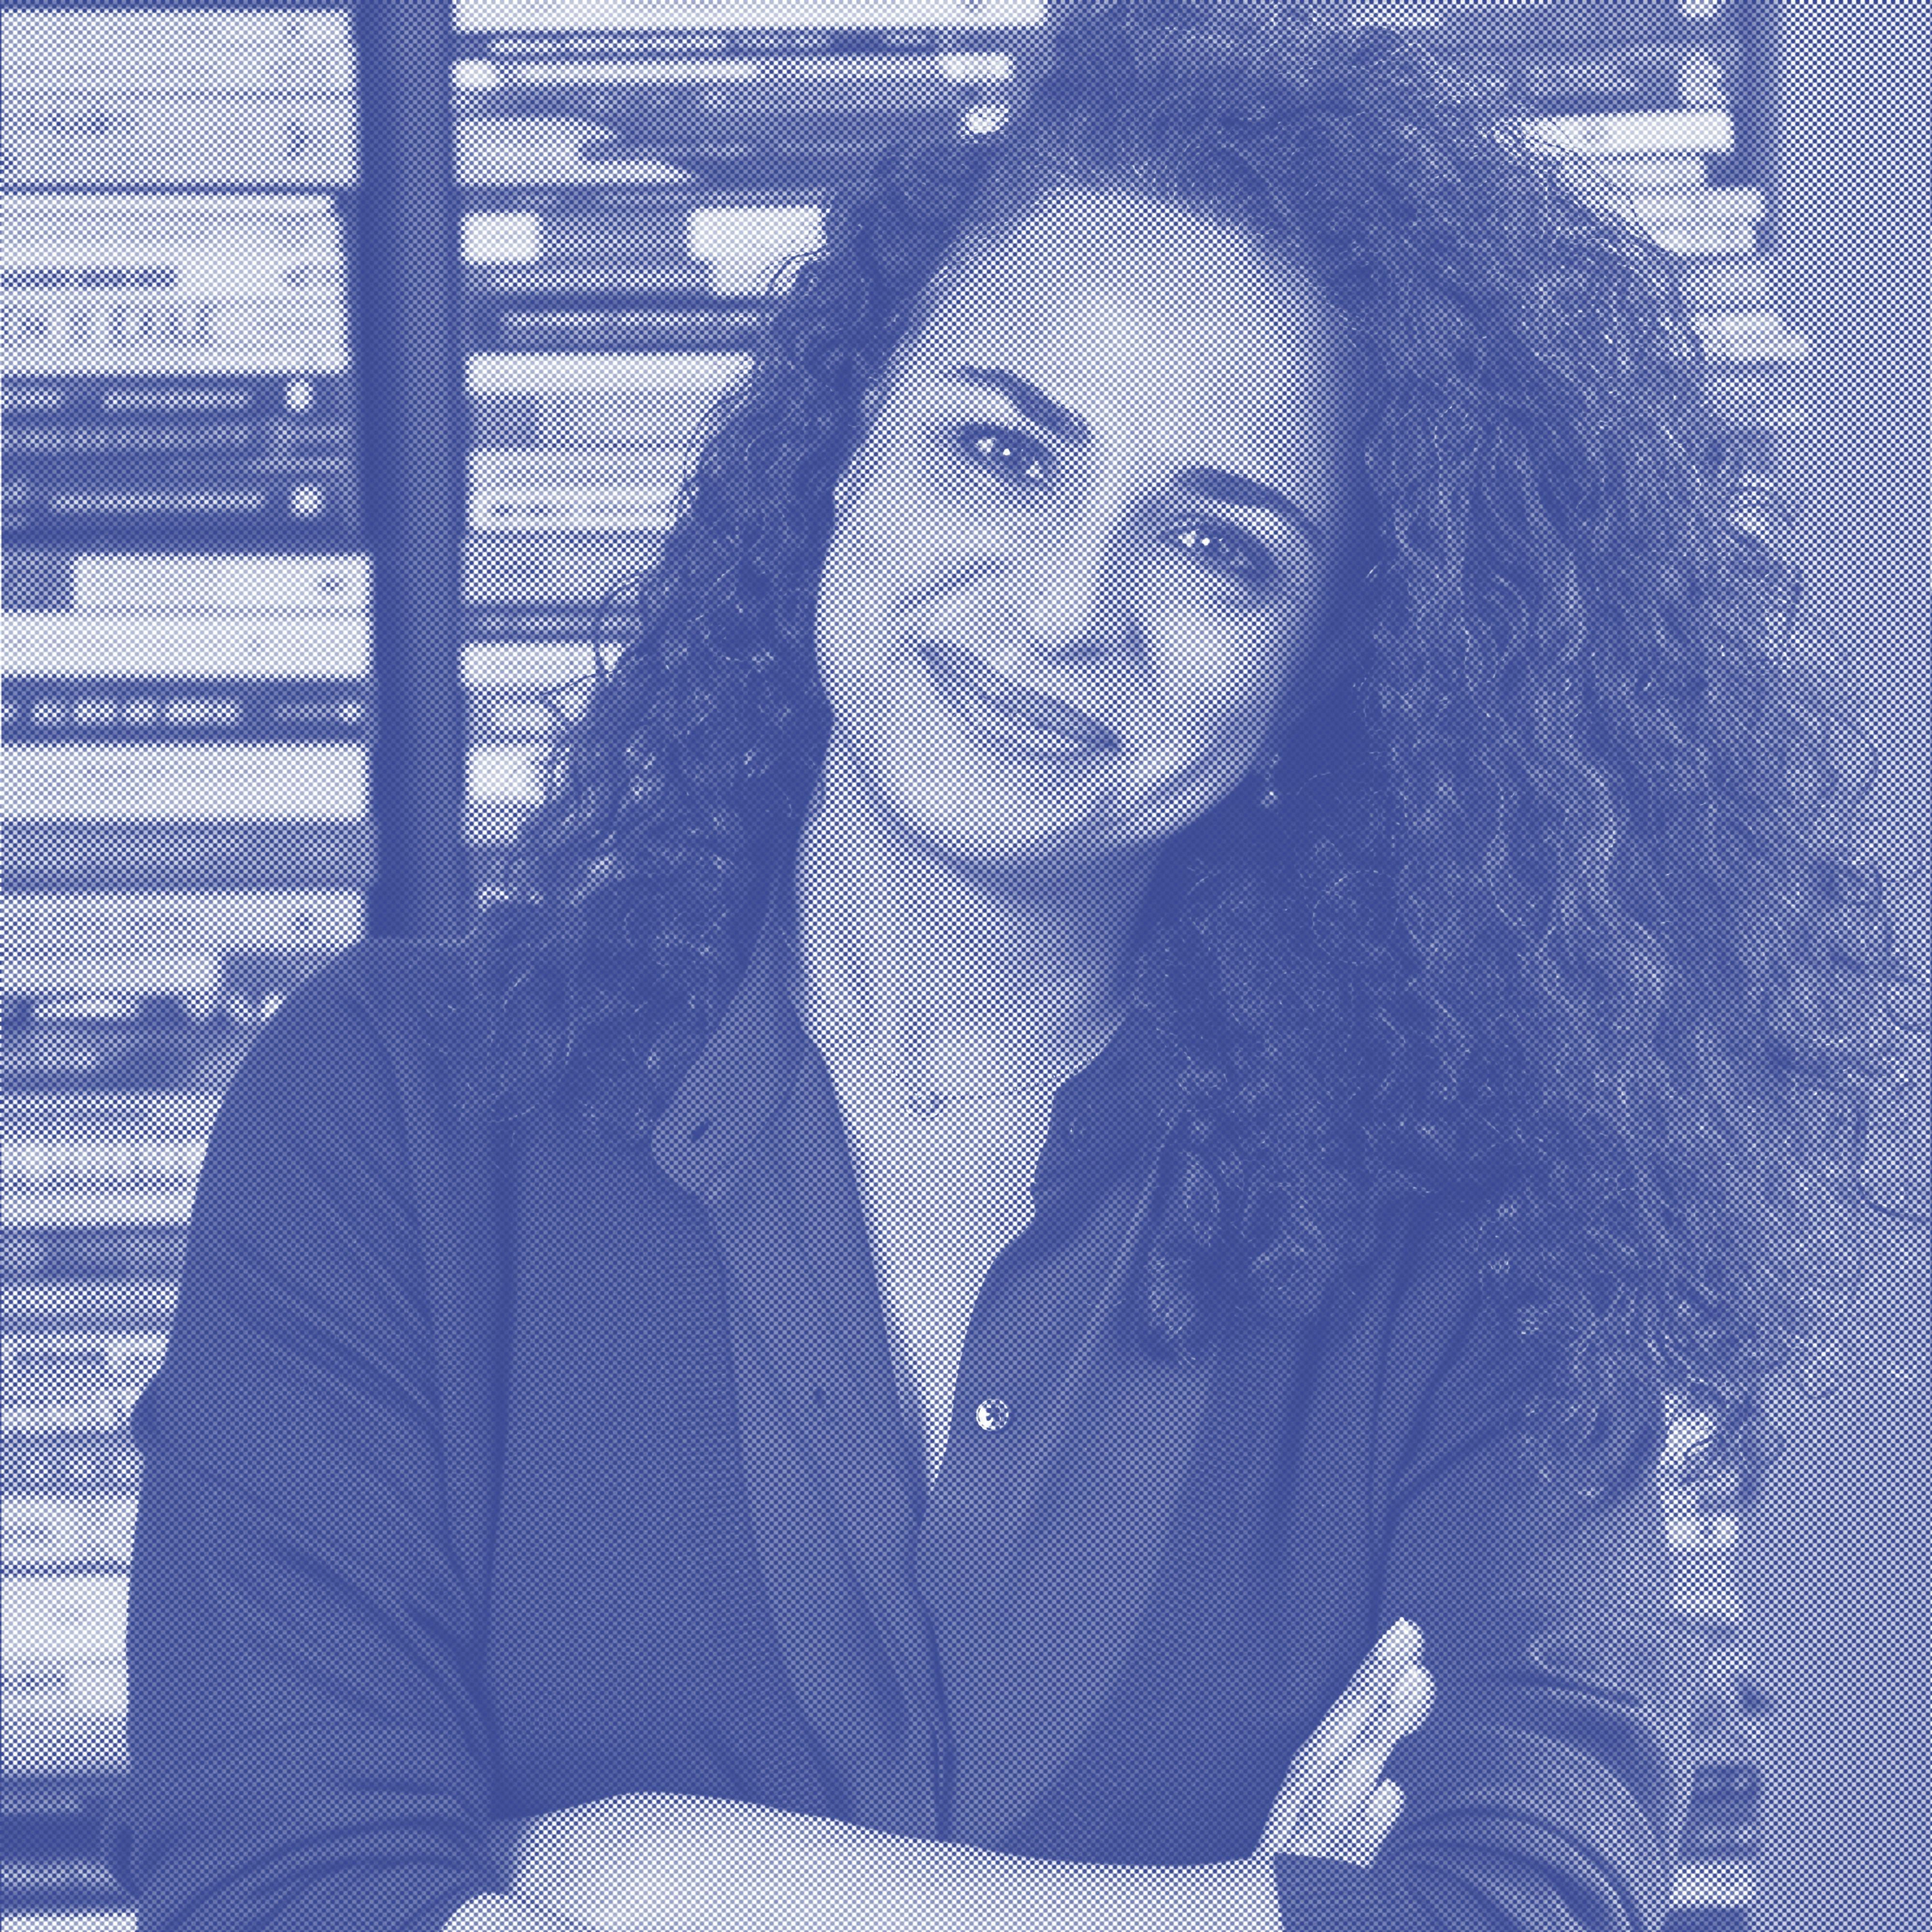 ‘Every act of reading is historical,’ Nadia Wassef on the art of reading vs. the craft of writing, and the business of founding Diwan, one of Egypt’s most popular modern book stores.